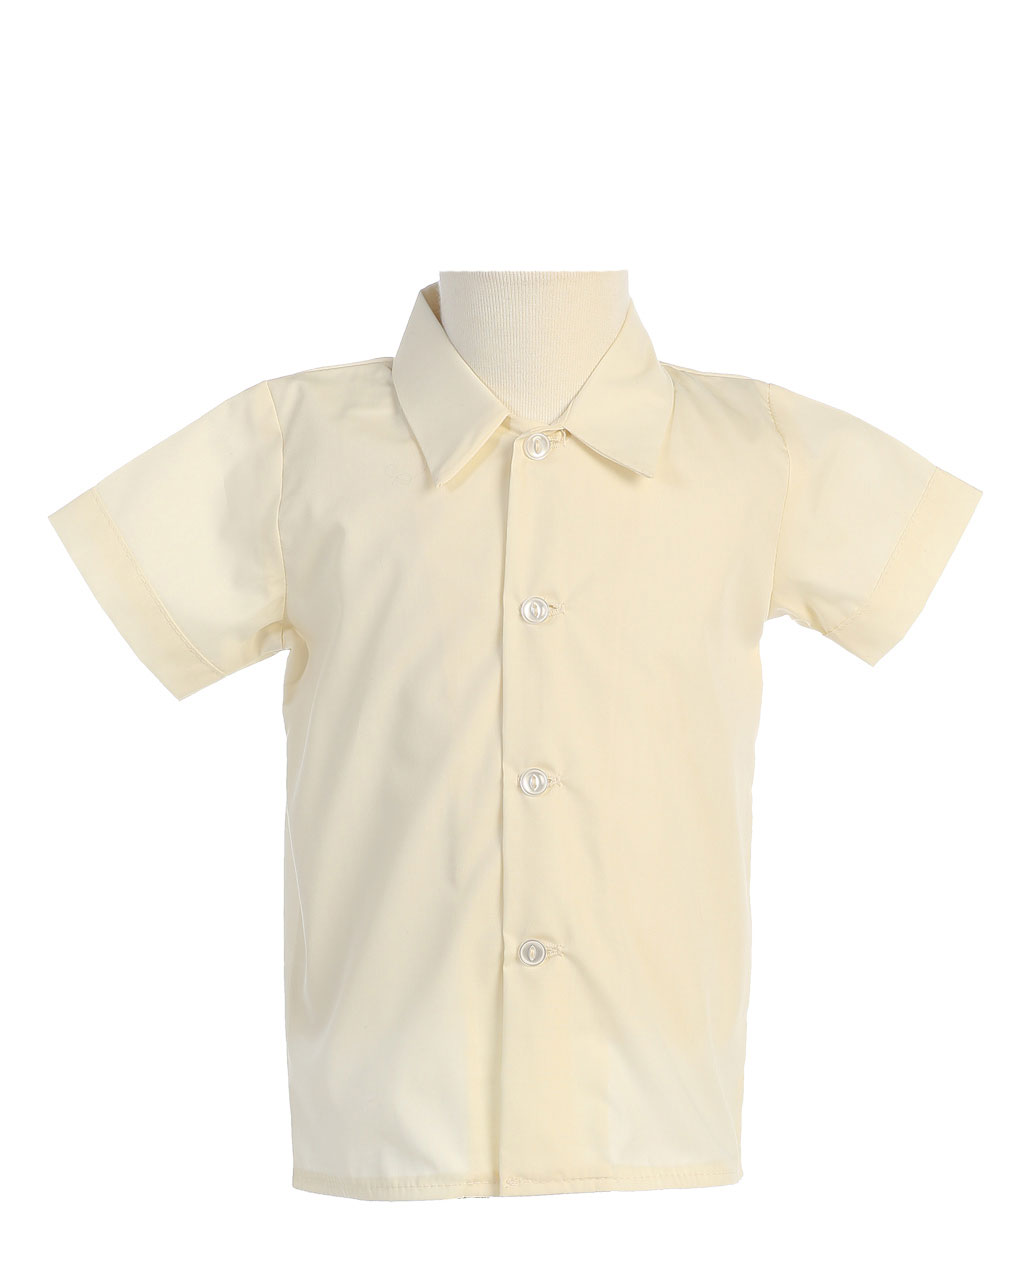 Boys Short Sleeved Simple Dress Shirt - Available in Ivory M